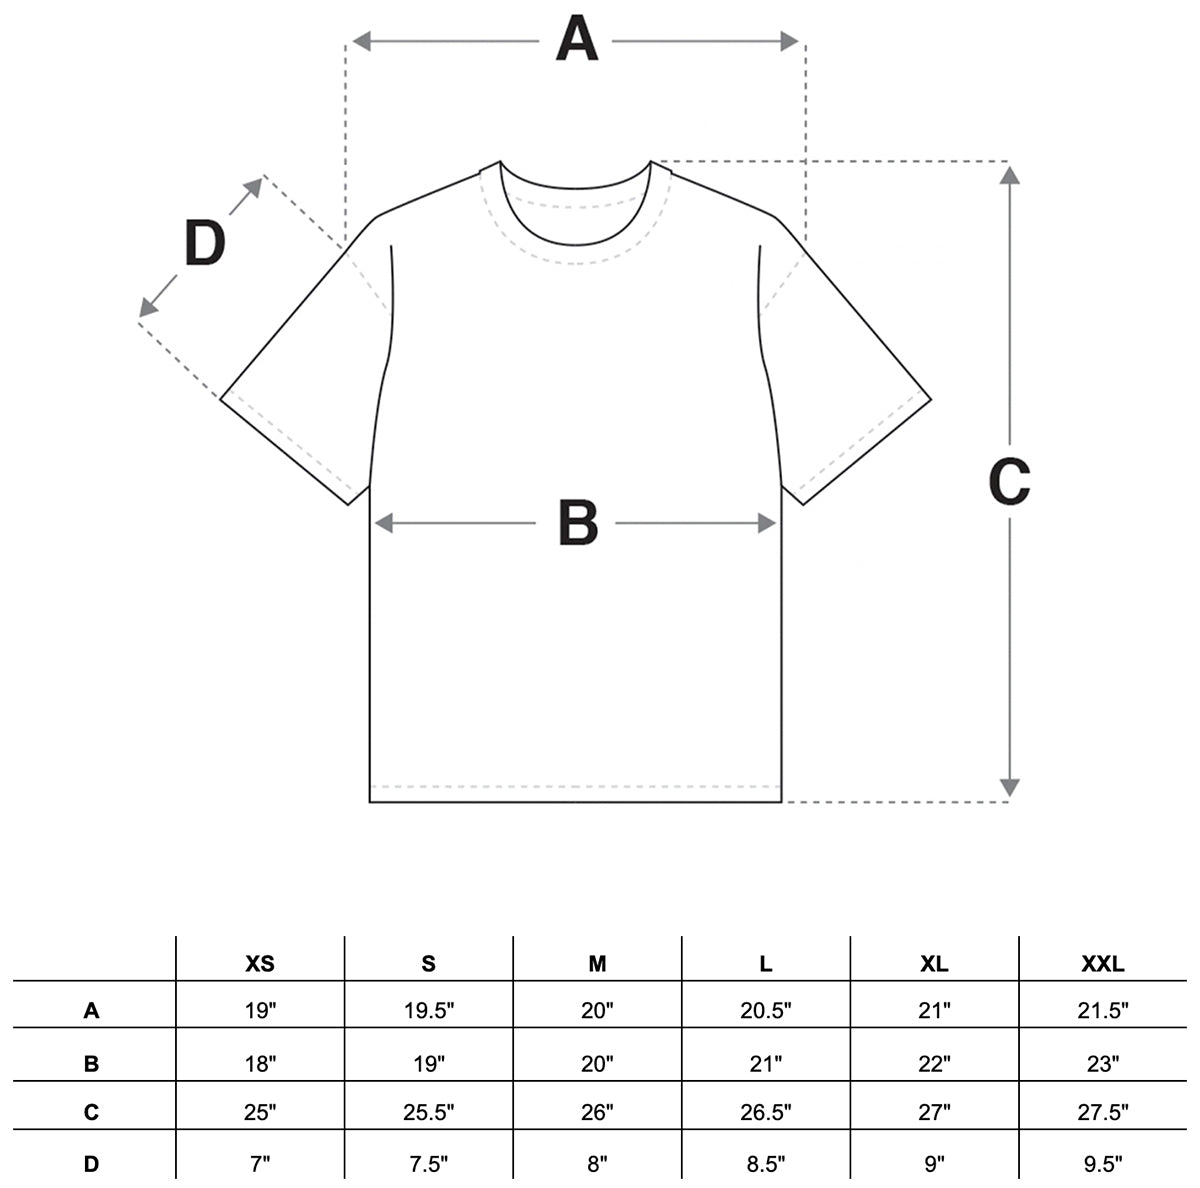 Desire Paths T-Shirt in Black Size Guide